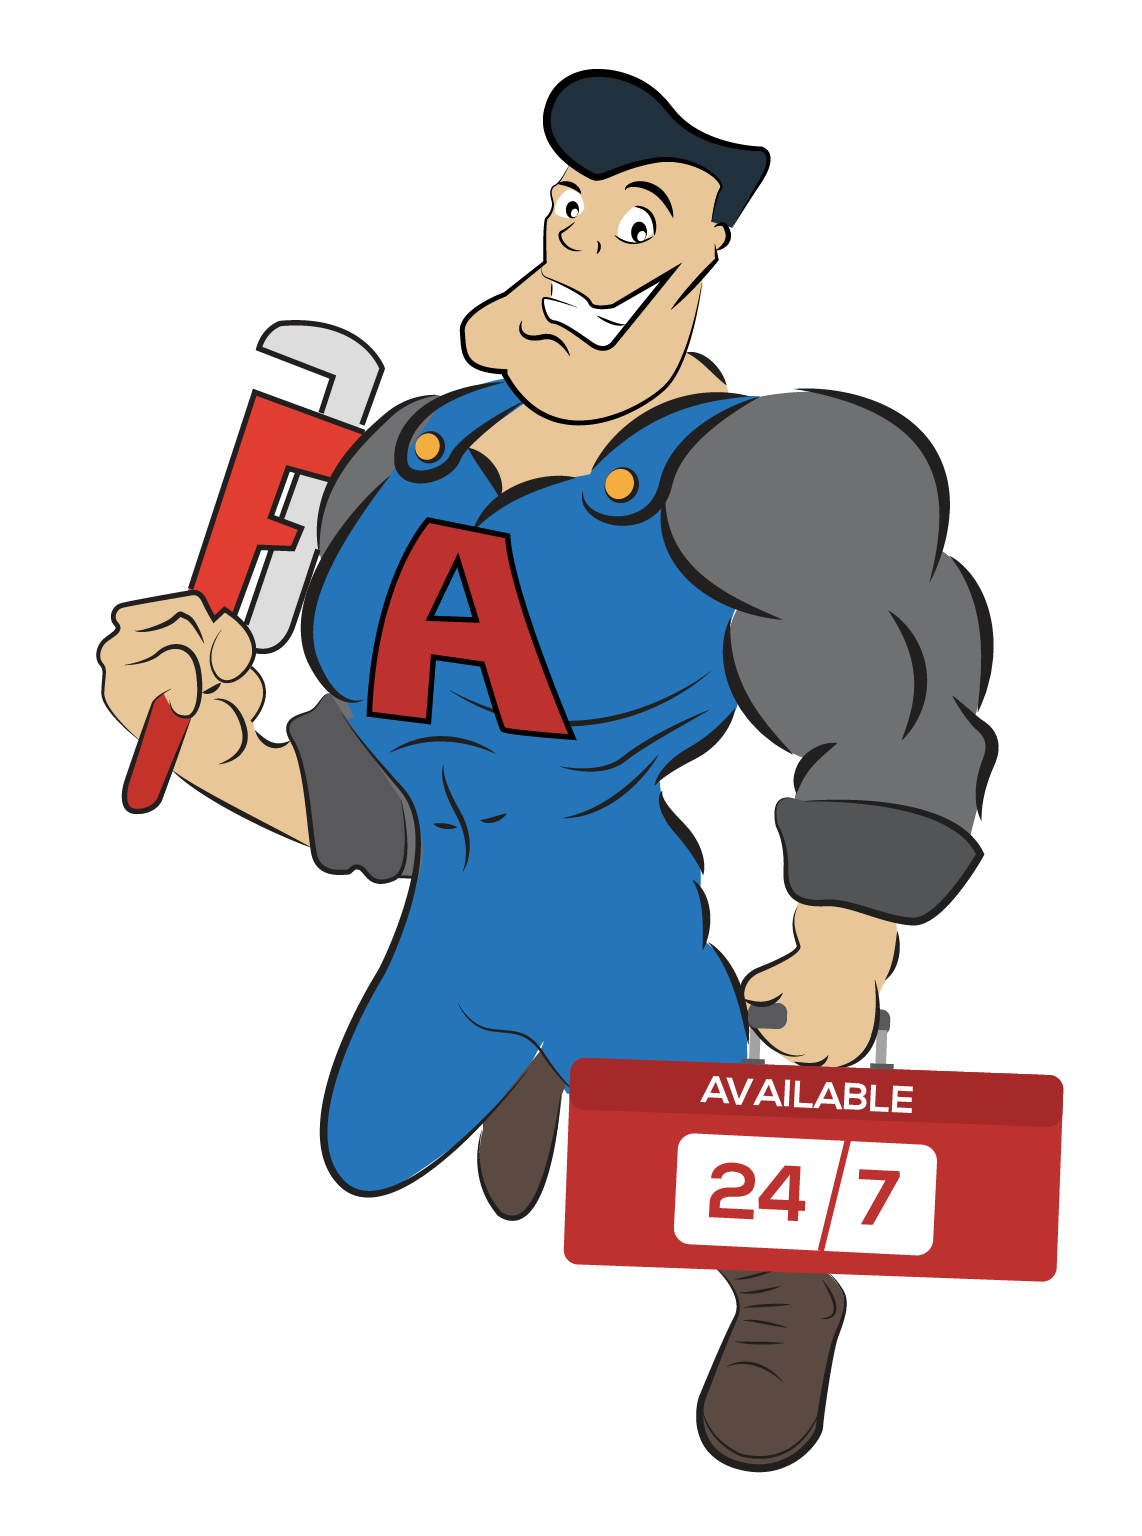 Why choose action plumbing